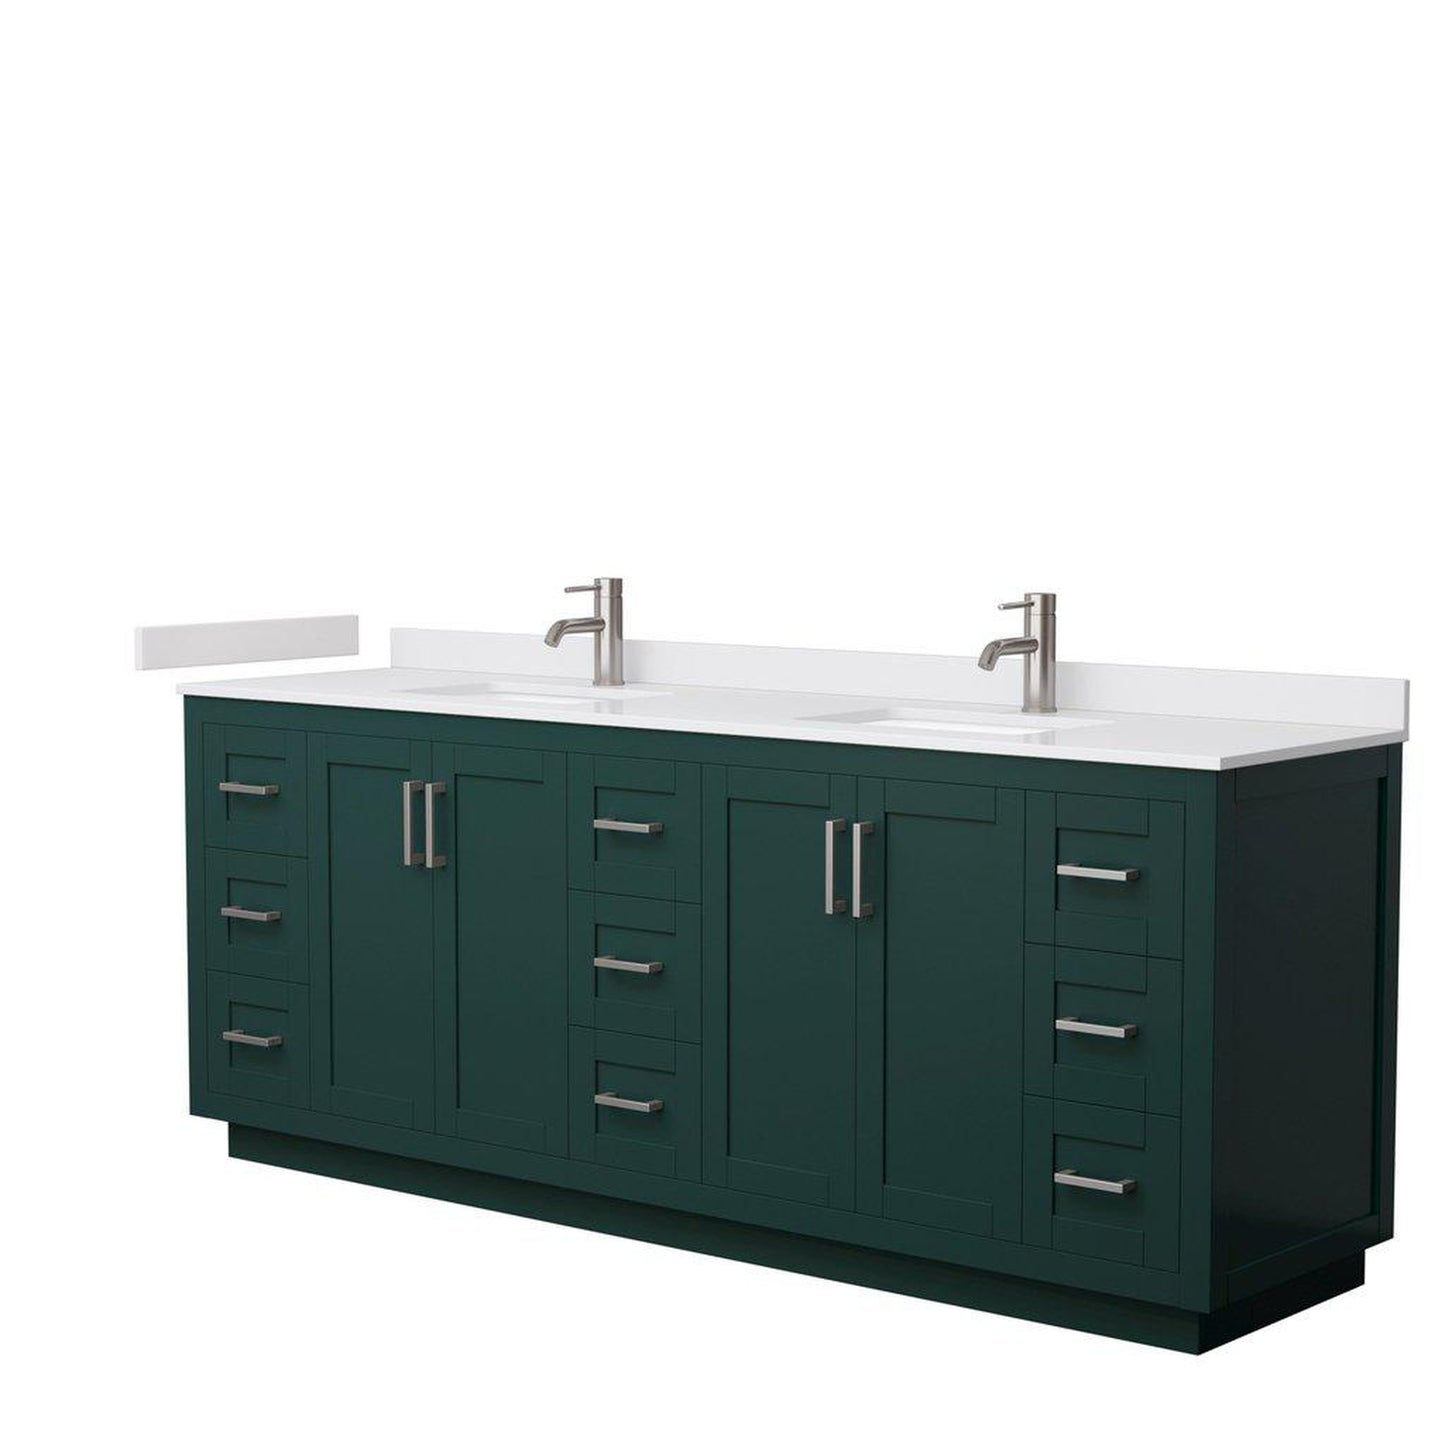 Wyndham Collection Miranda 84" Double Bathroom Green Vanity Set With White Cultured Marble Countertop, Undermount Square Sink, And Brushed Nickel Trim